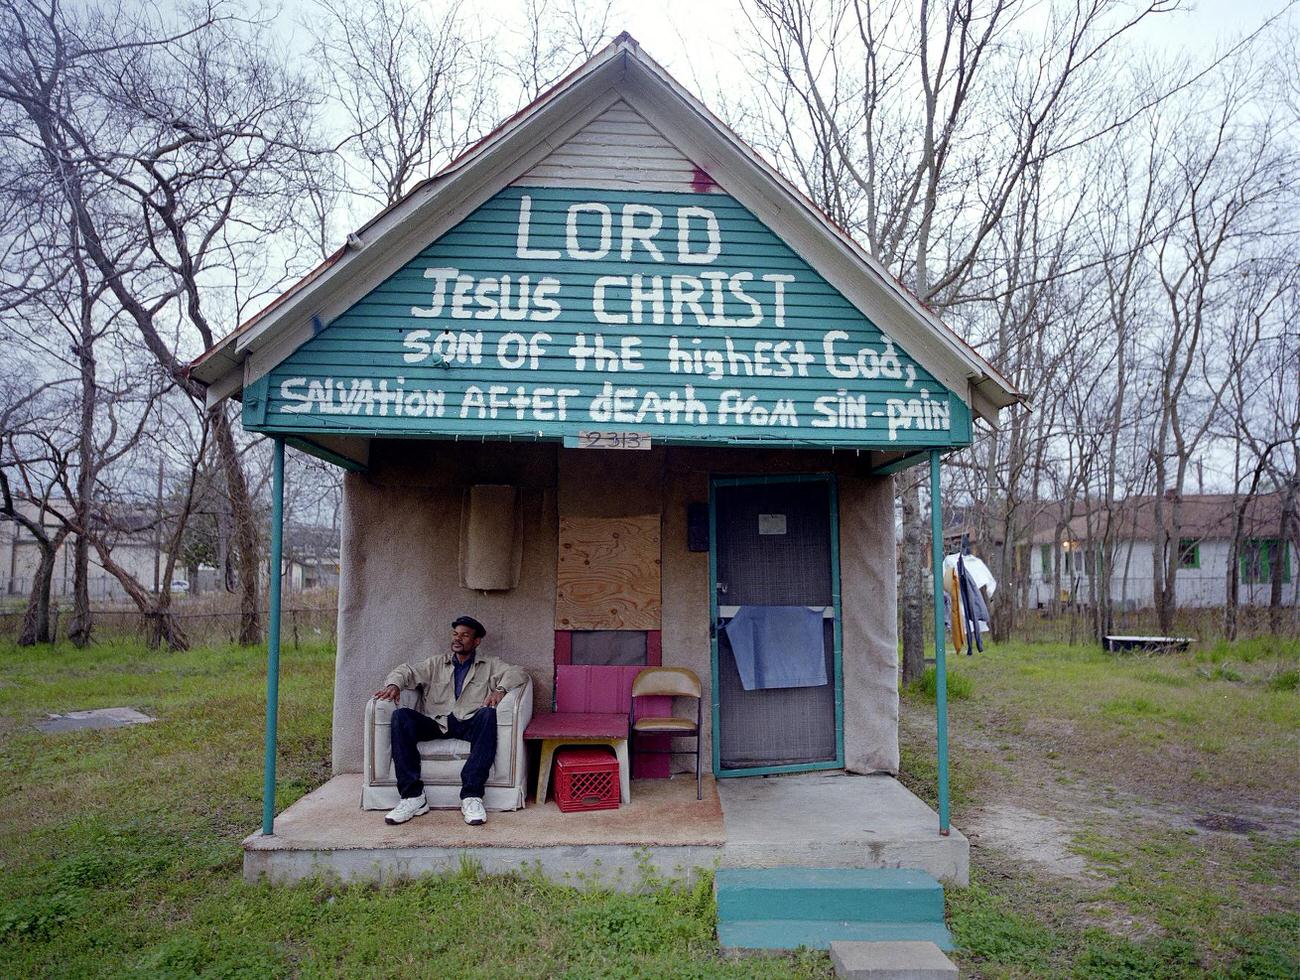 Man with a message in Houston, Texas, 1990s